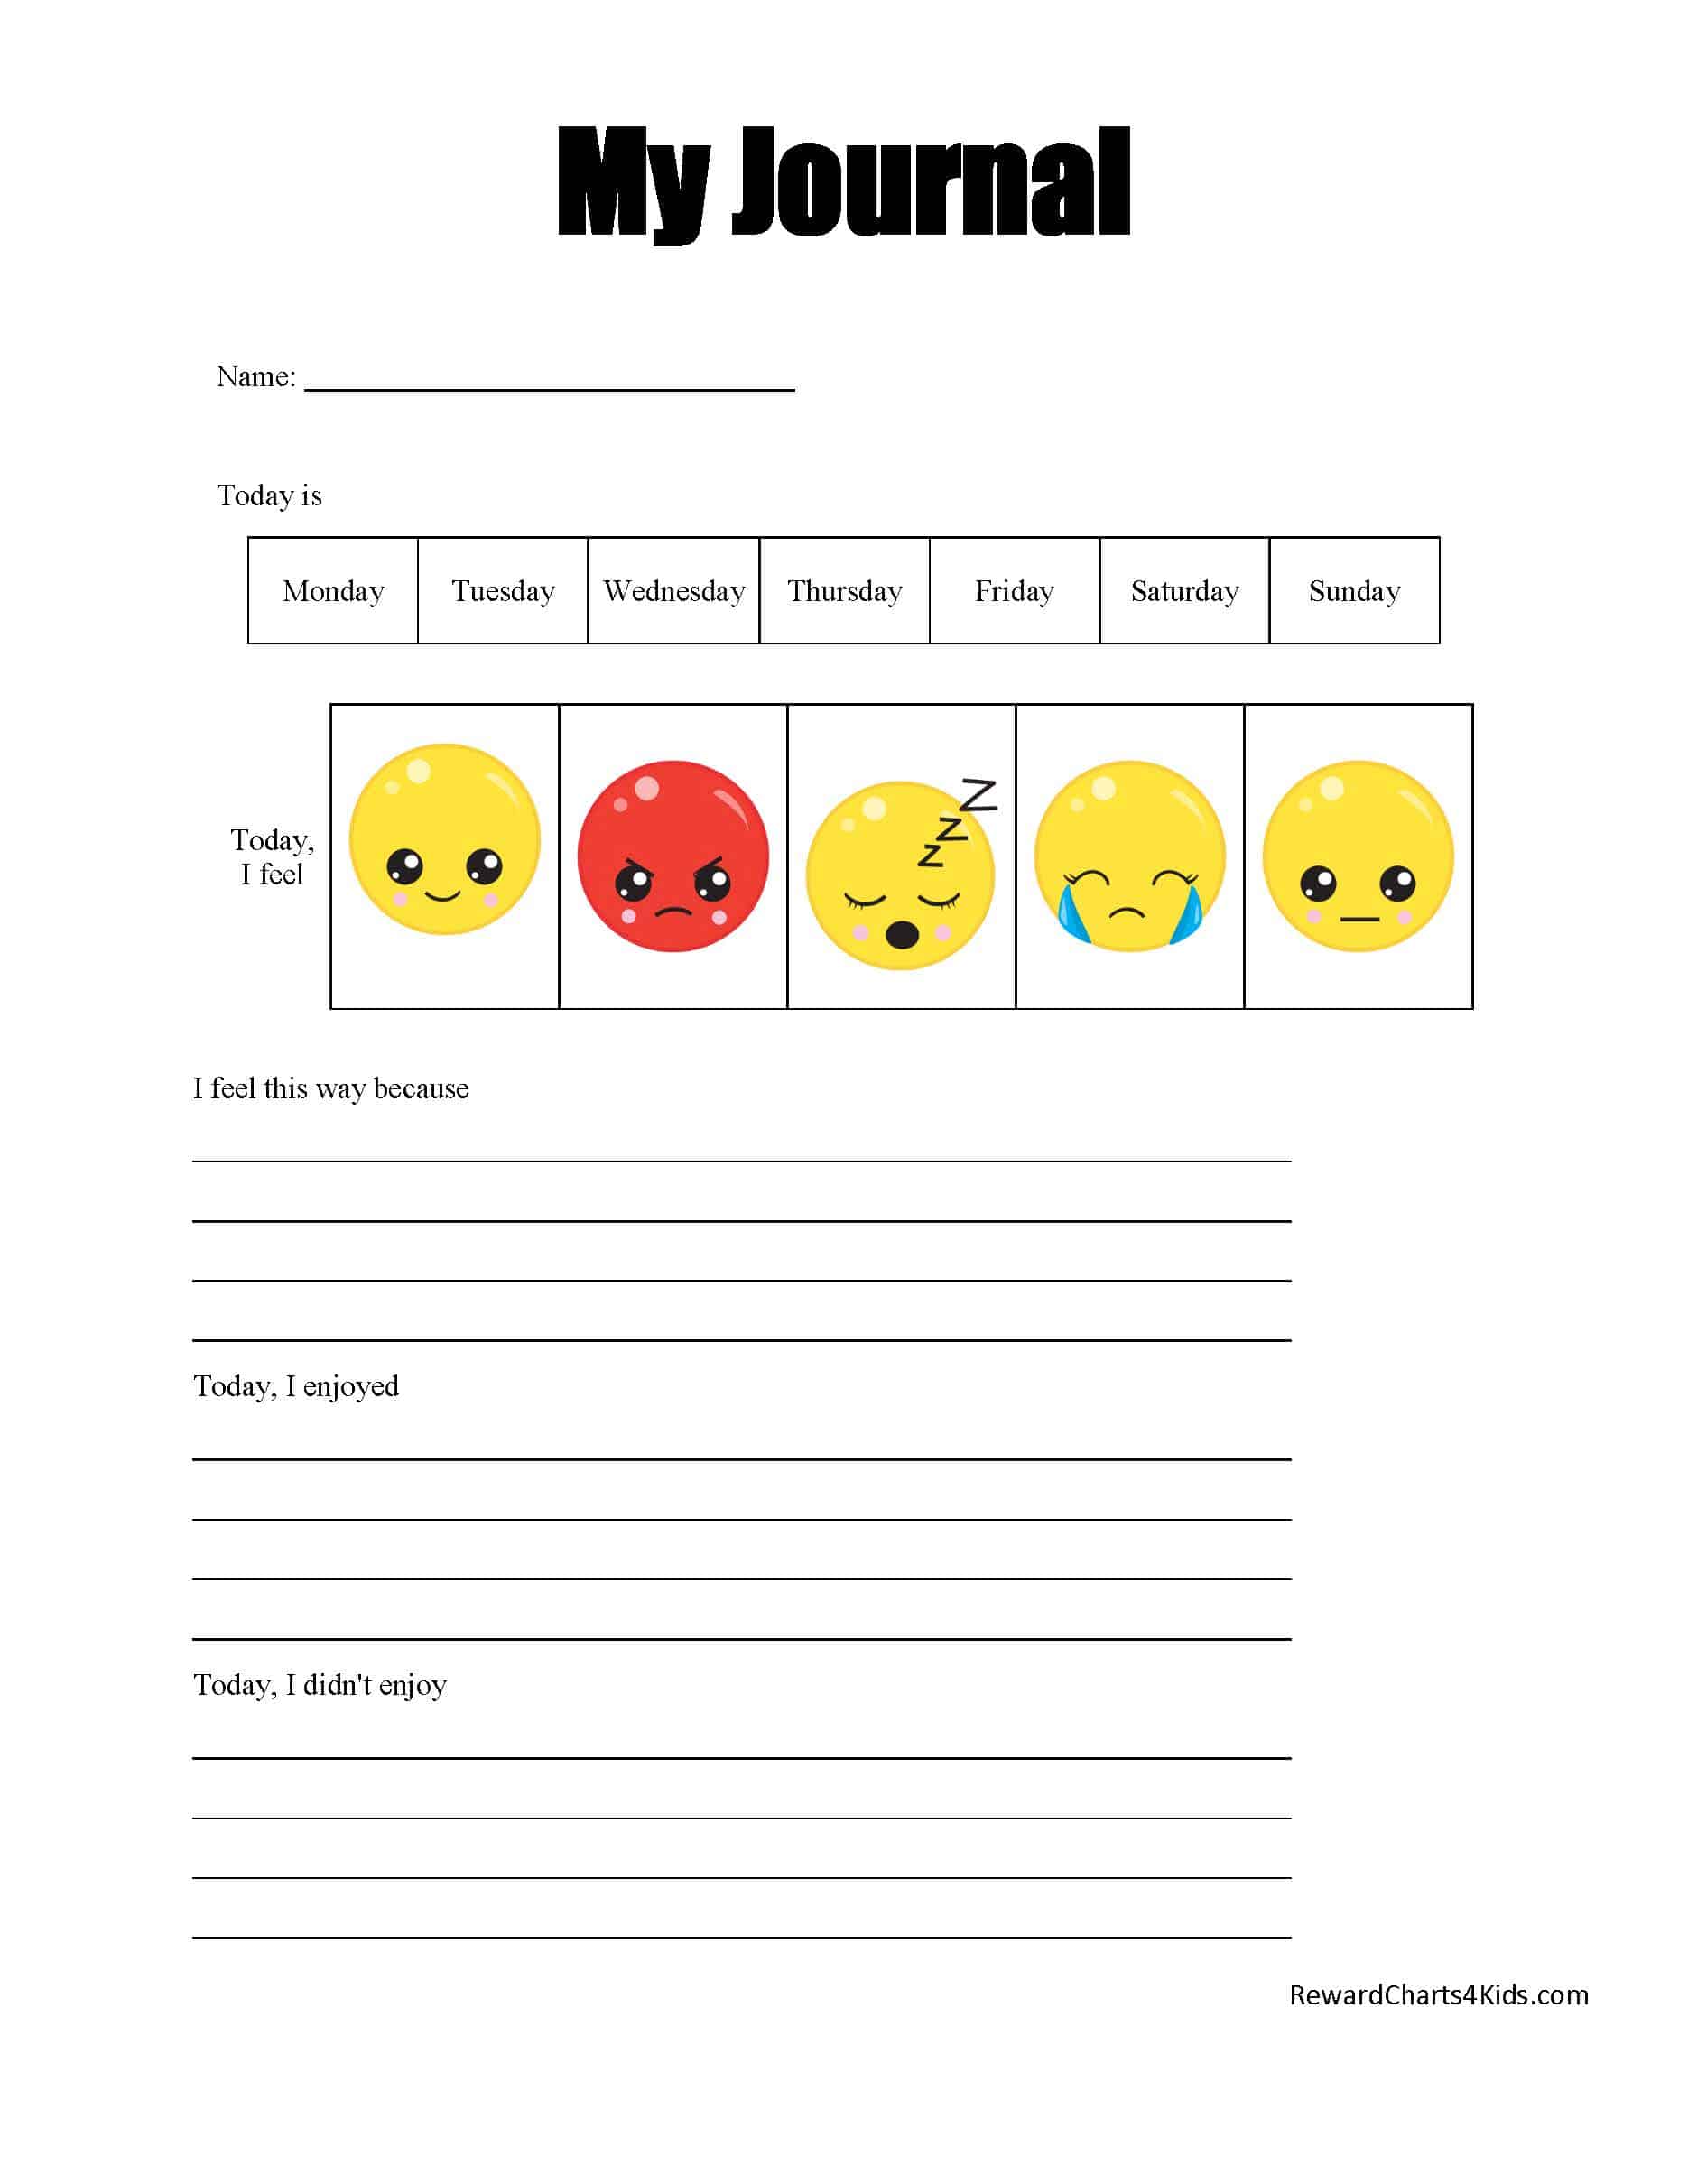 free-printable-feelings-chart-instant-download